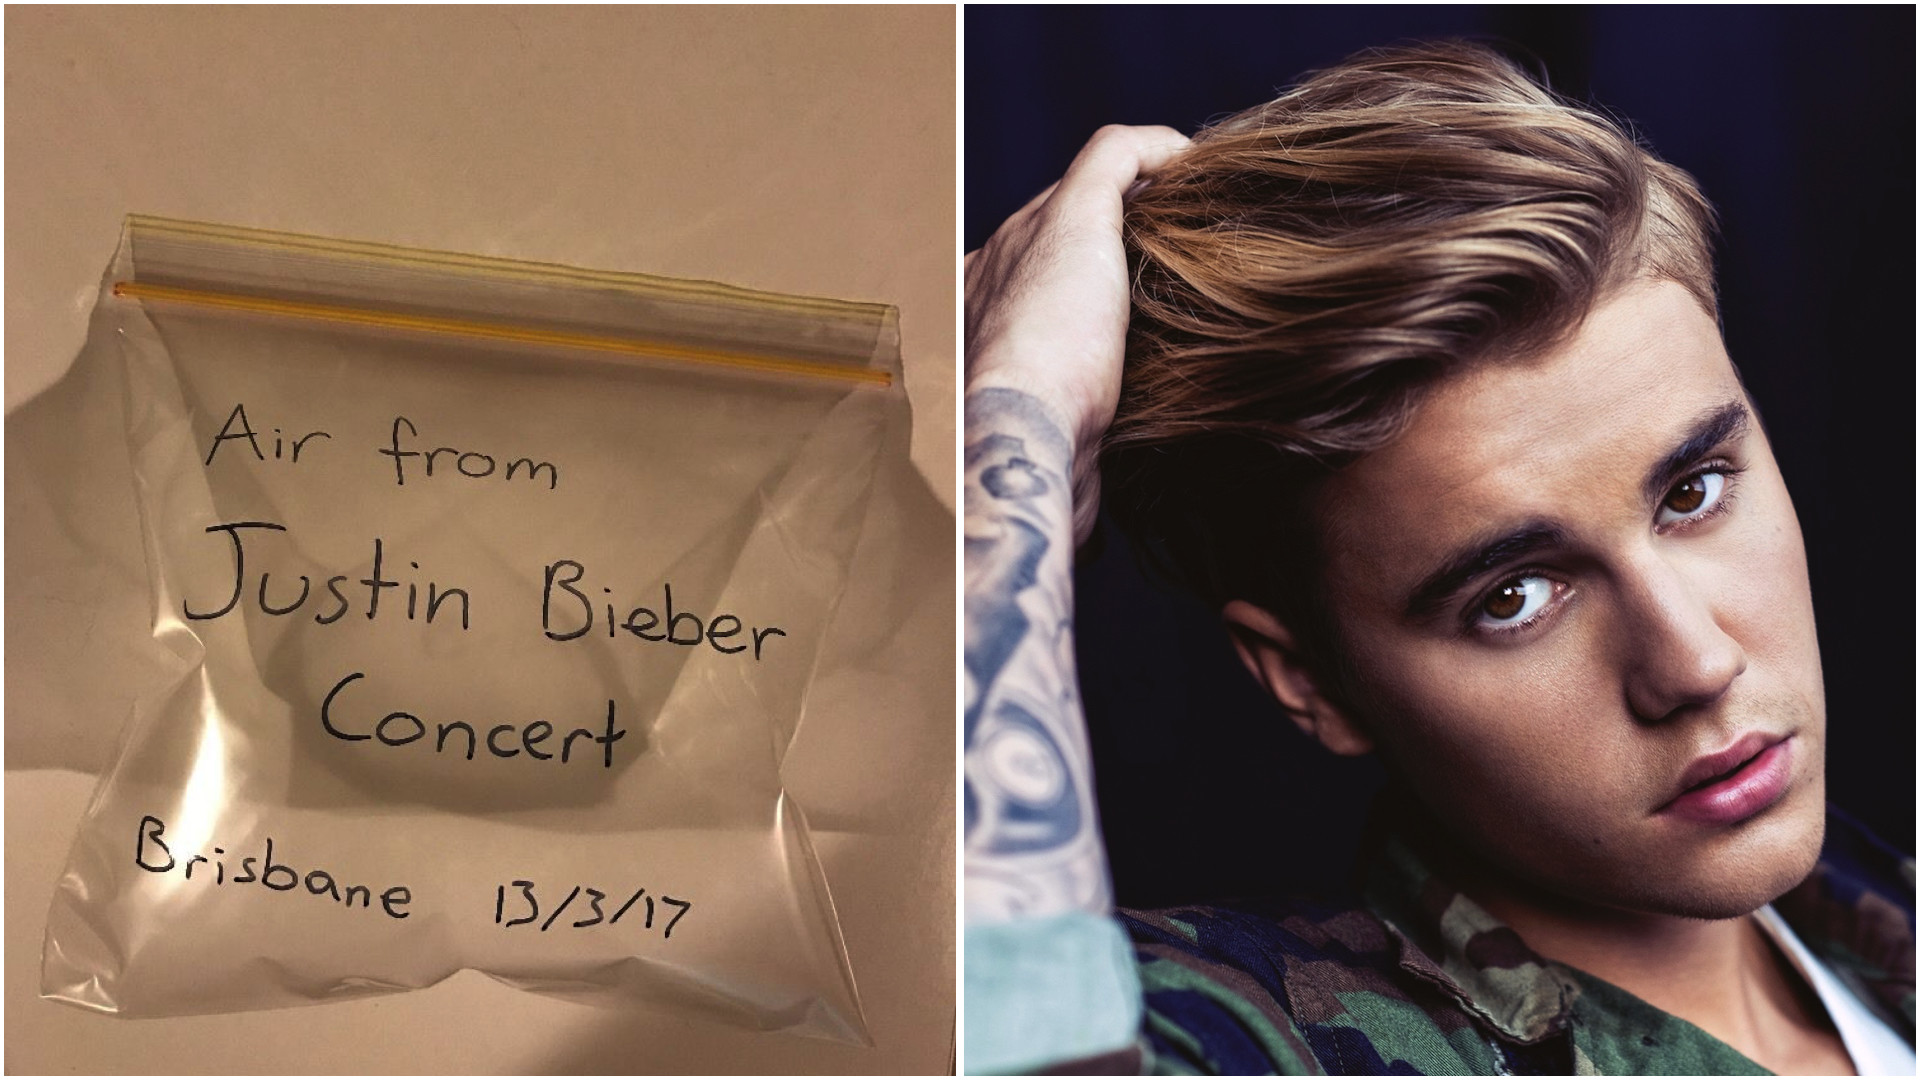 People Are Selling Air From Justin Biebers Aussie Tour On eBay Now – Music Feeds